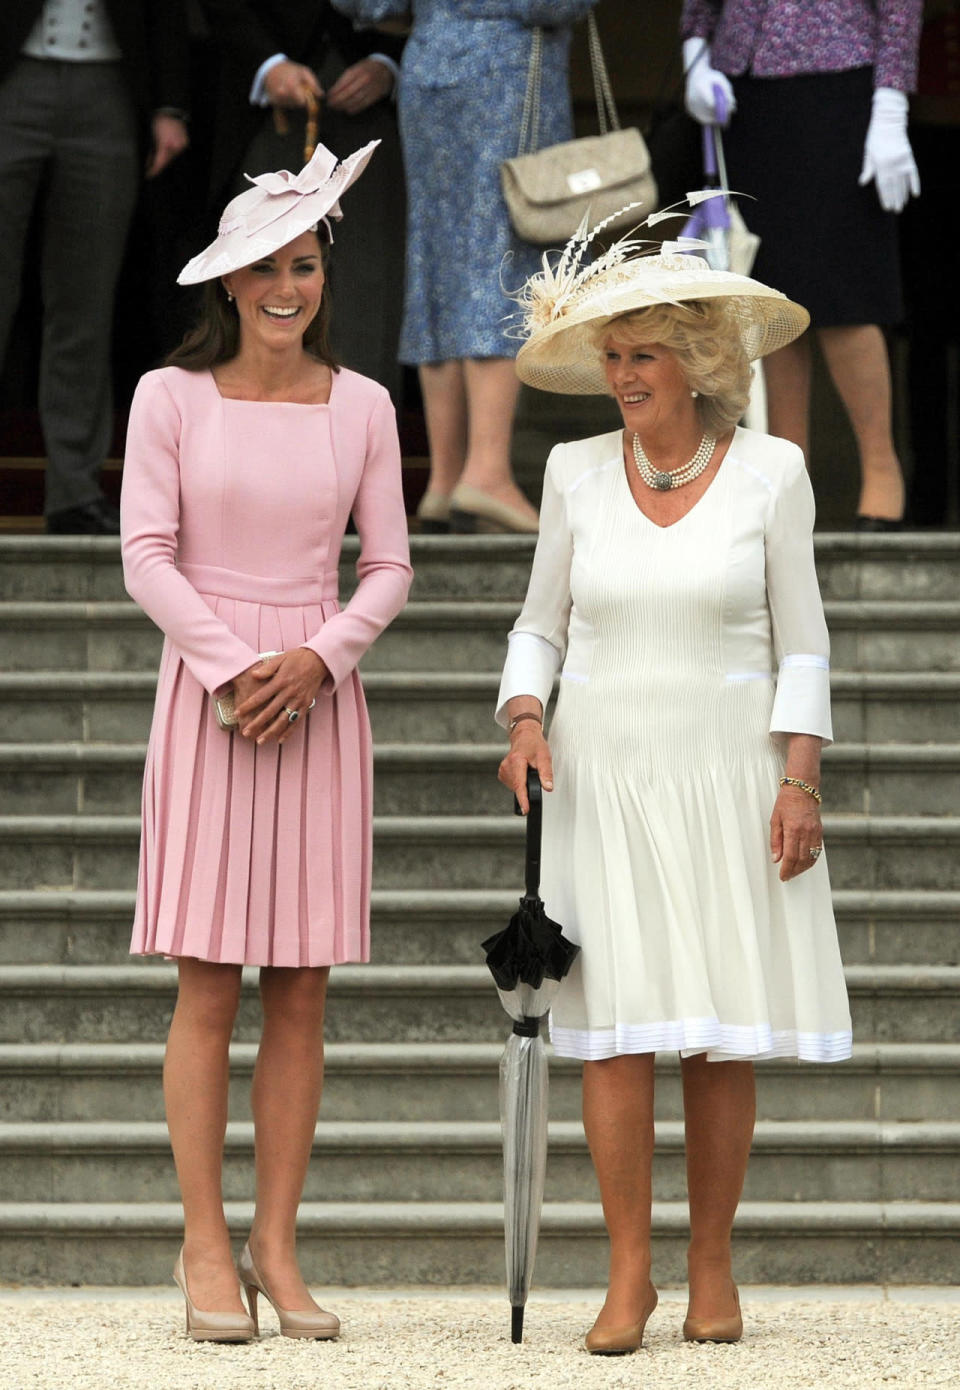 <p>Kate wore a familiar pink pleated dress by Emilia Wickstead for a garden party at Buckingham Palace. She accessorised with a wide-brimmed hat by Jane Corbett and donned a bag and heels from L.K. Bennett.</p><p><i>[Photo: PA]</i></p>